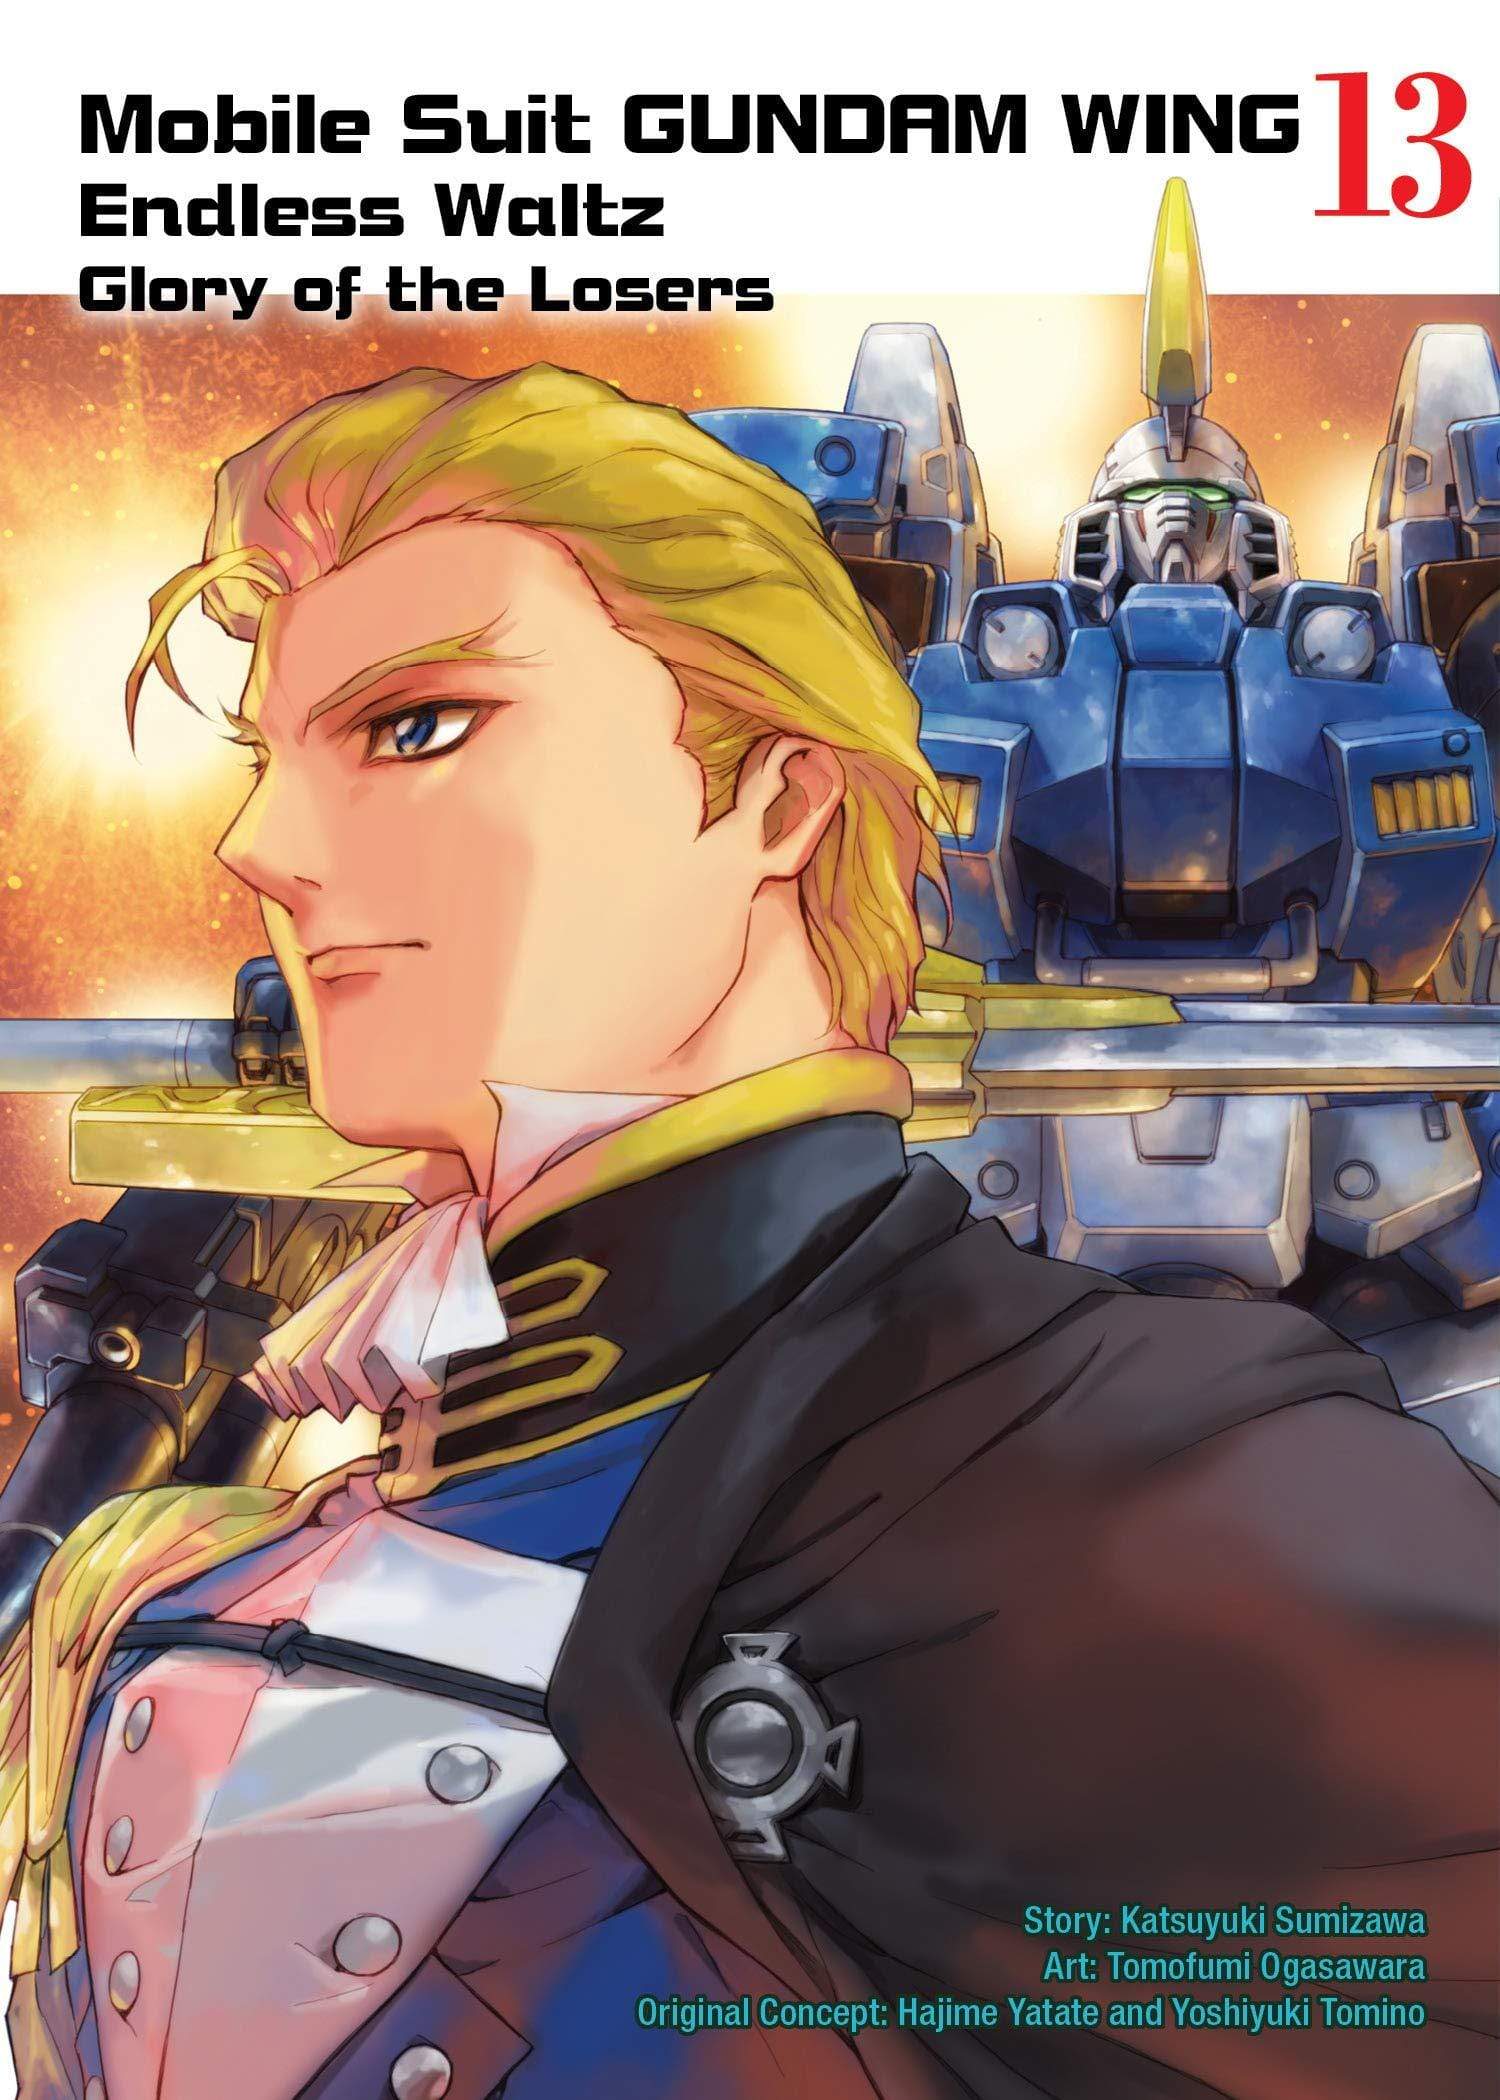 Mobile Suit Gundam WING, volume 13 Endless Waltz Glory of the Losers - Saltire Games